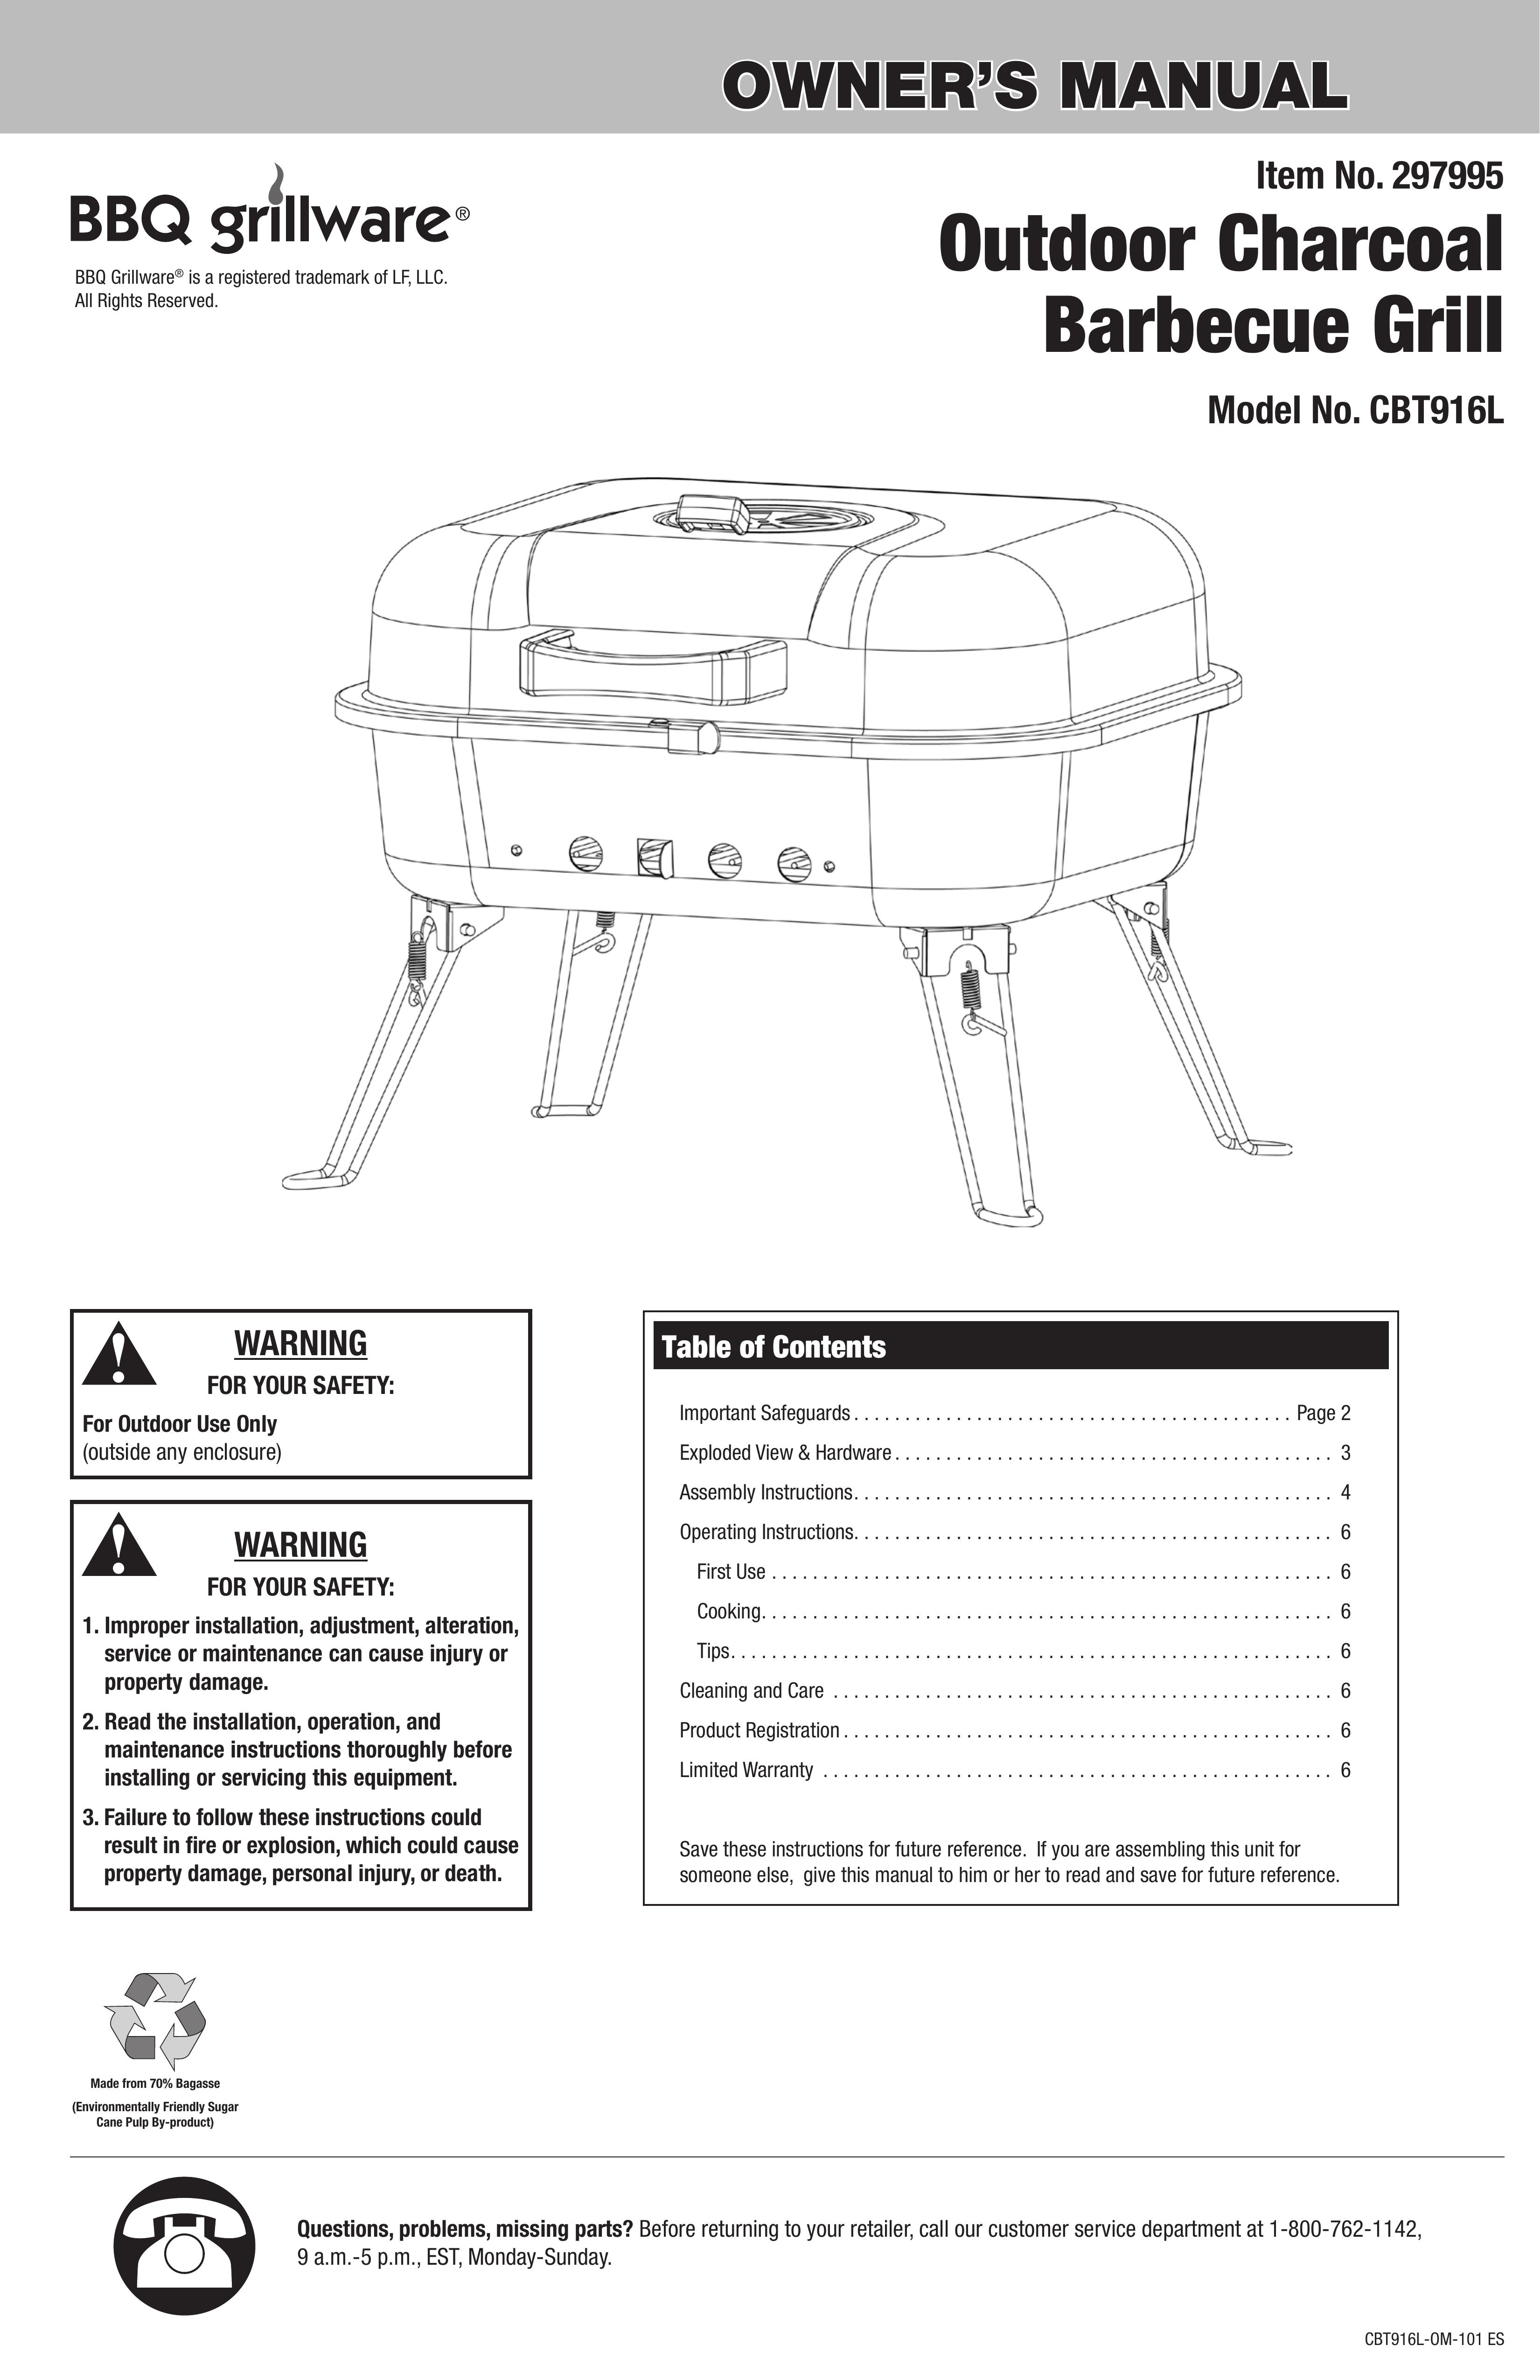 Blue Rhino CBT916L Charcoal Grill User Manual (Page 1)